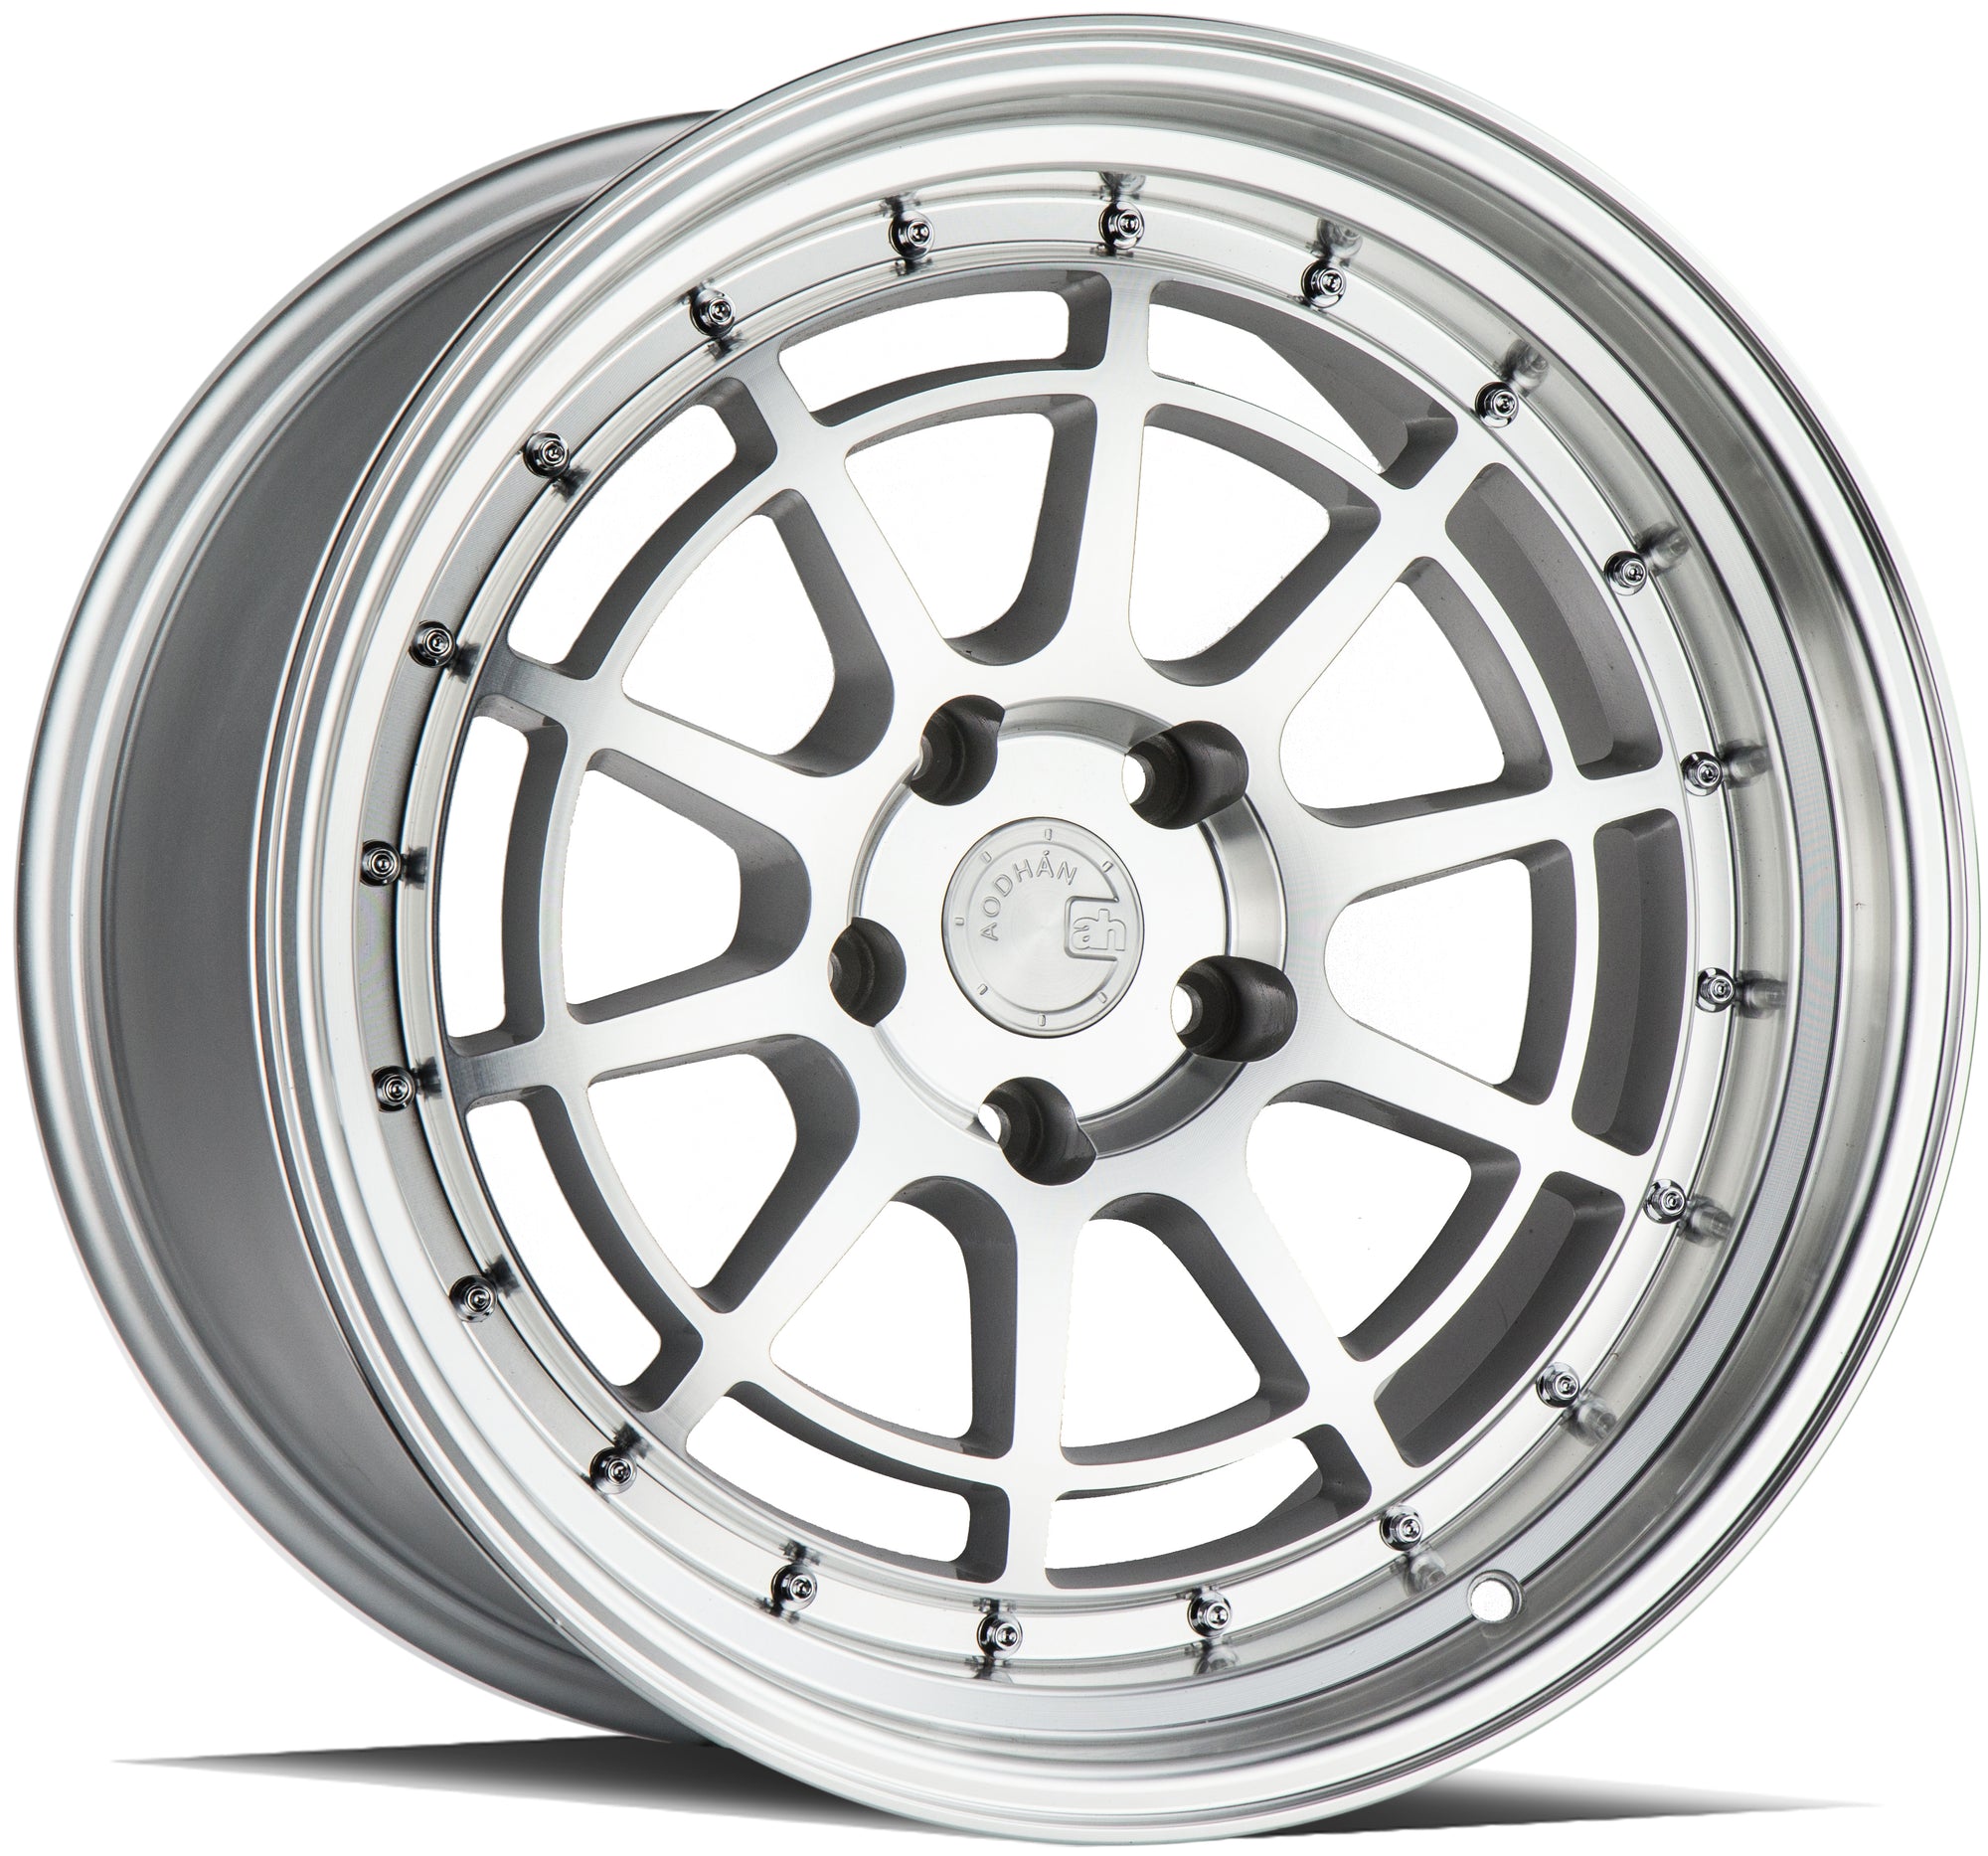 Aodhan AH04 18x10.5 5x114.3 +30 Silver Machined Face And Lip